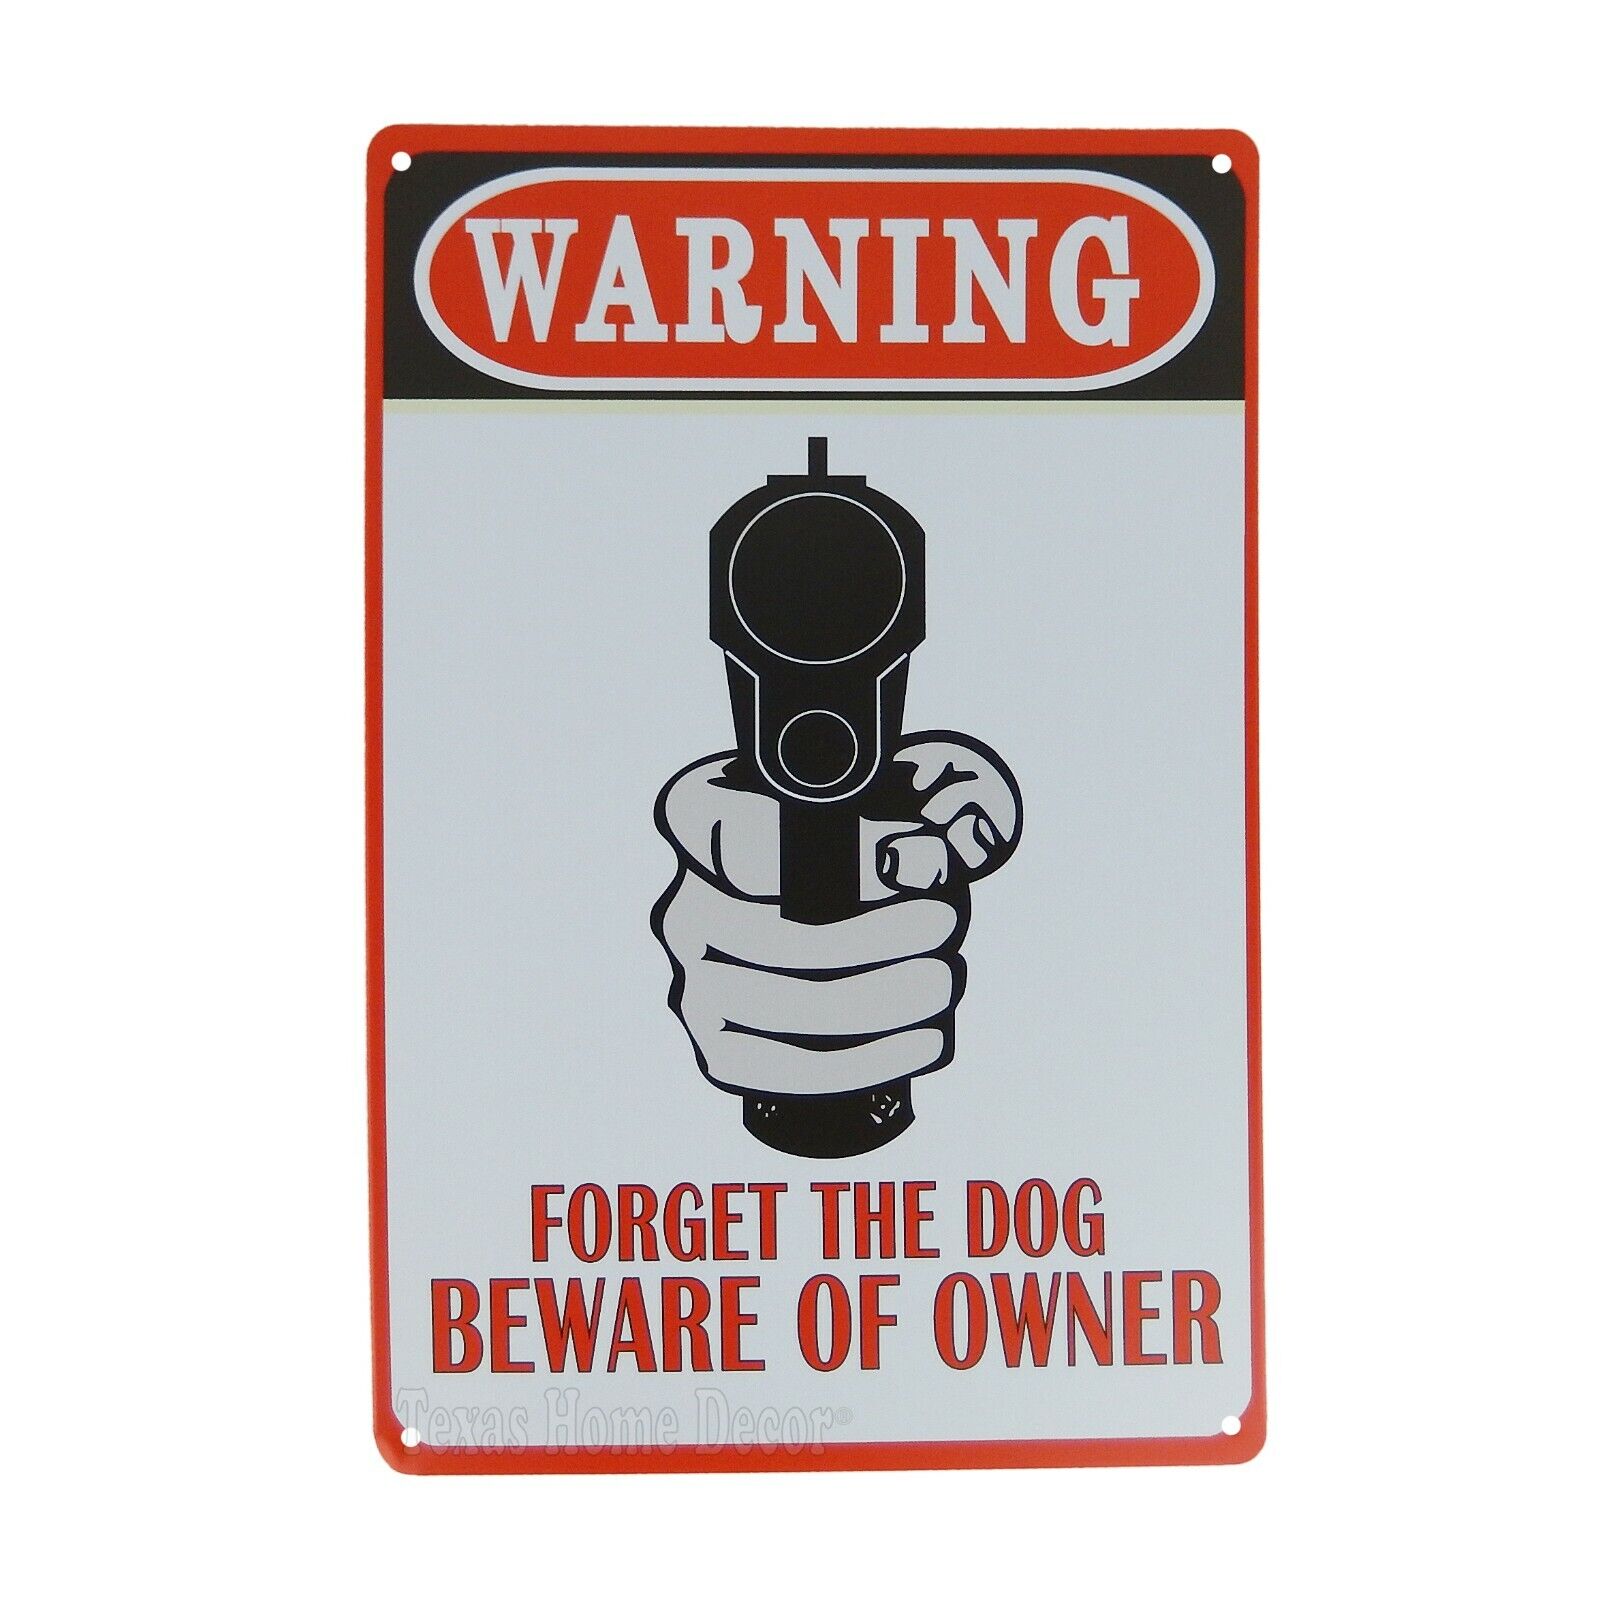 Forget The Dog Beware of Owner Metal Warning Tin Sign 11 3/4 inchs